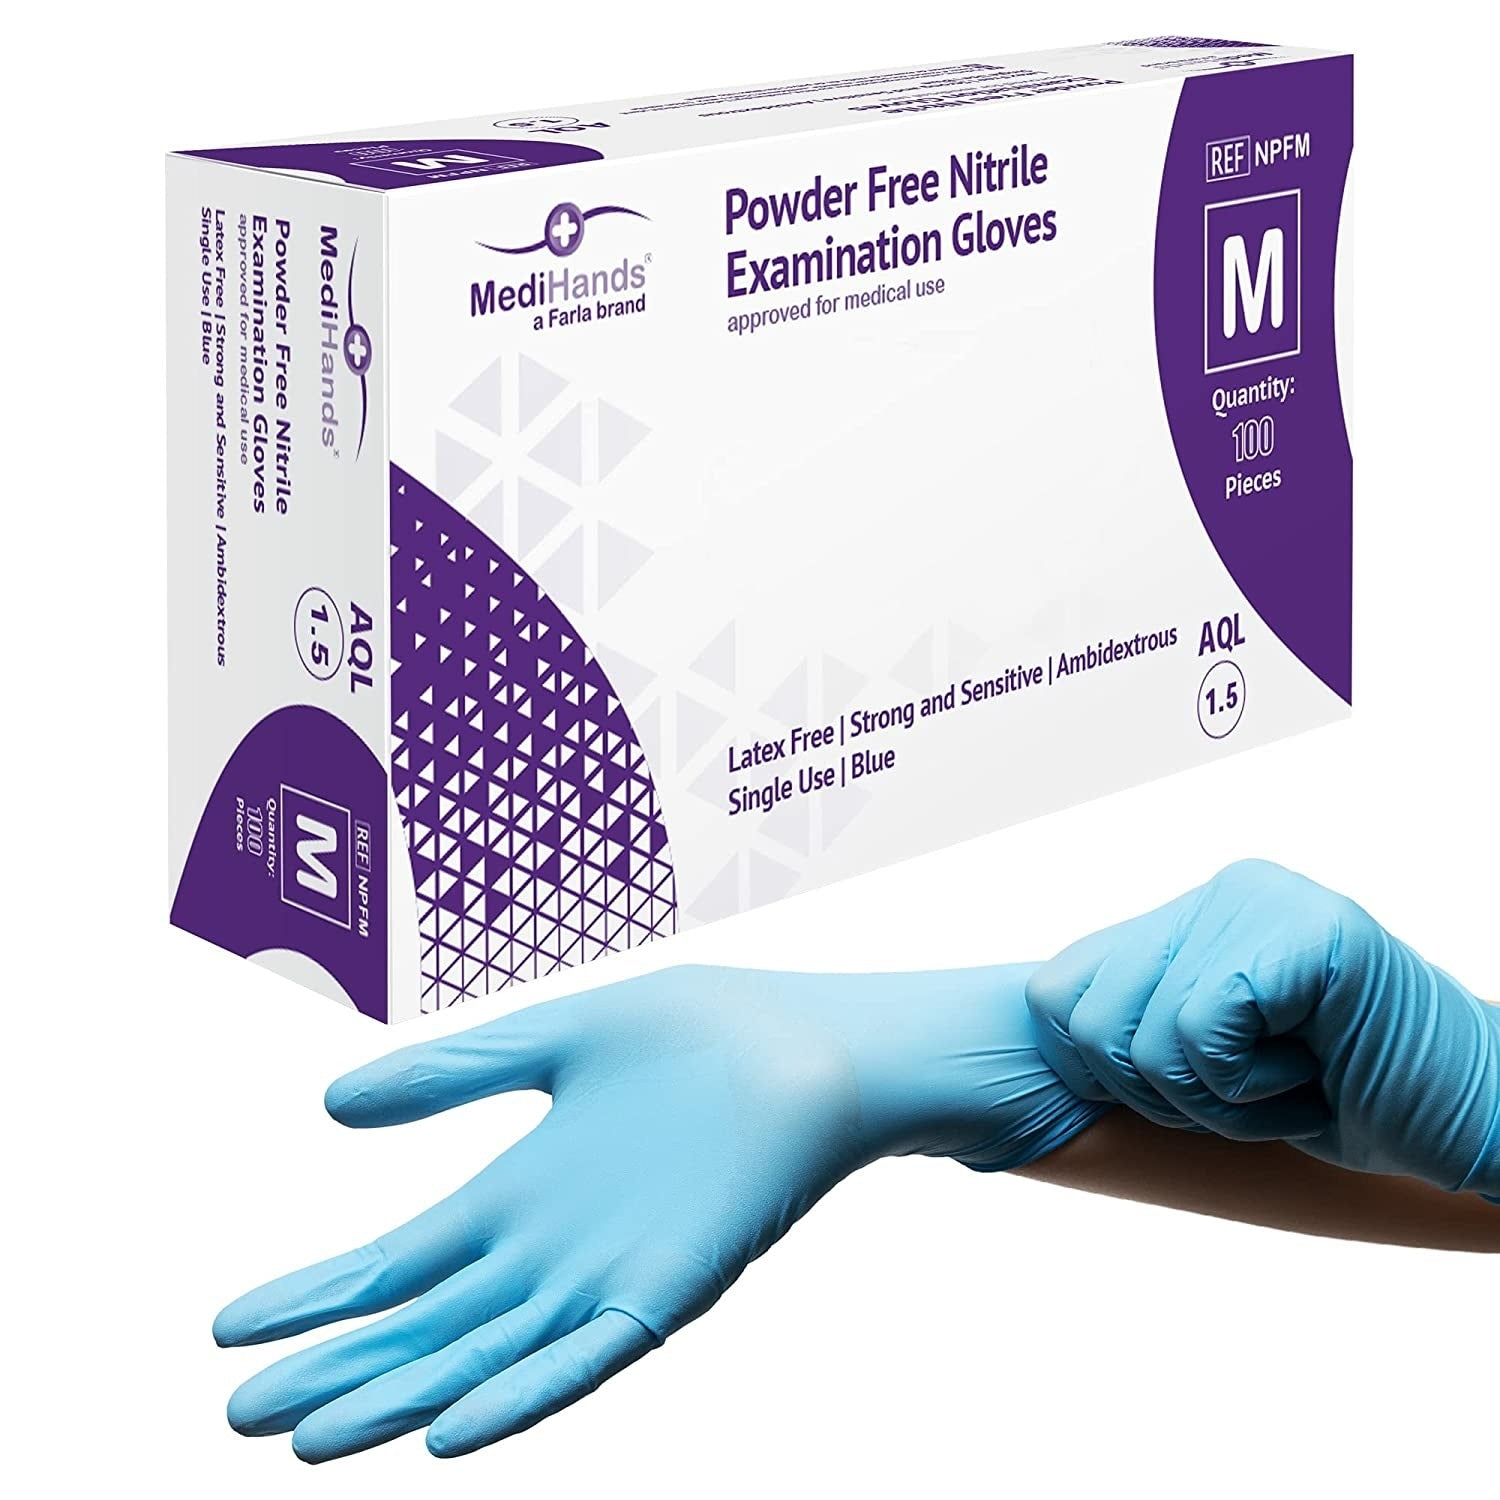 MediHands Examination Nitrile Powder Free Gloves | Blue | Pack of 100 Pieces (1)